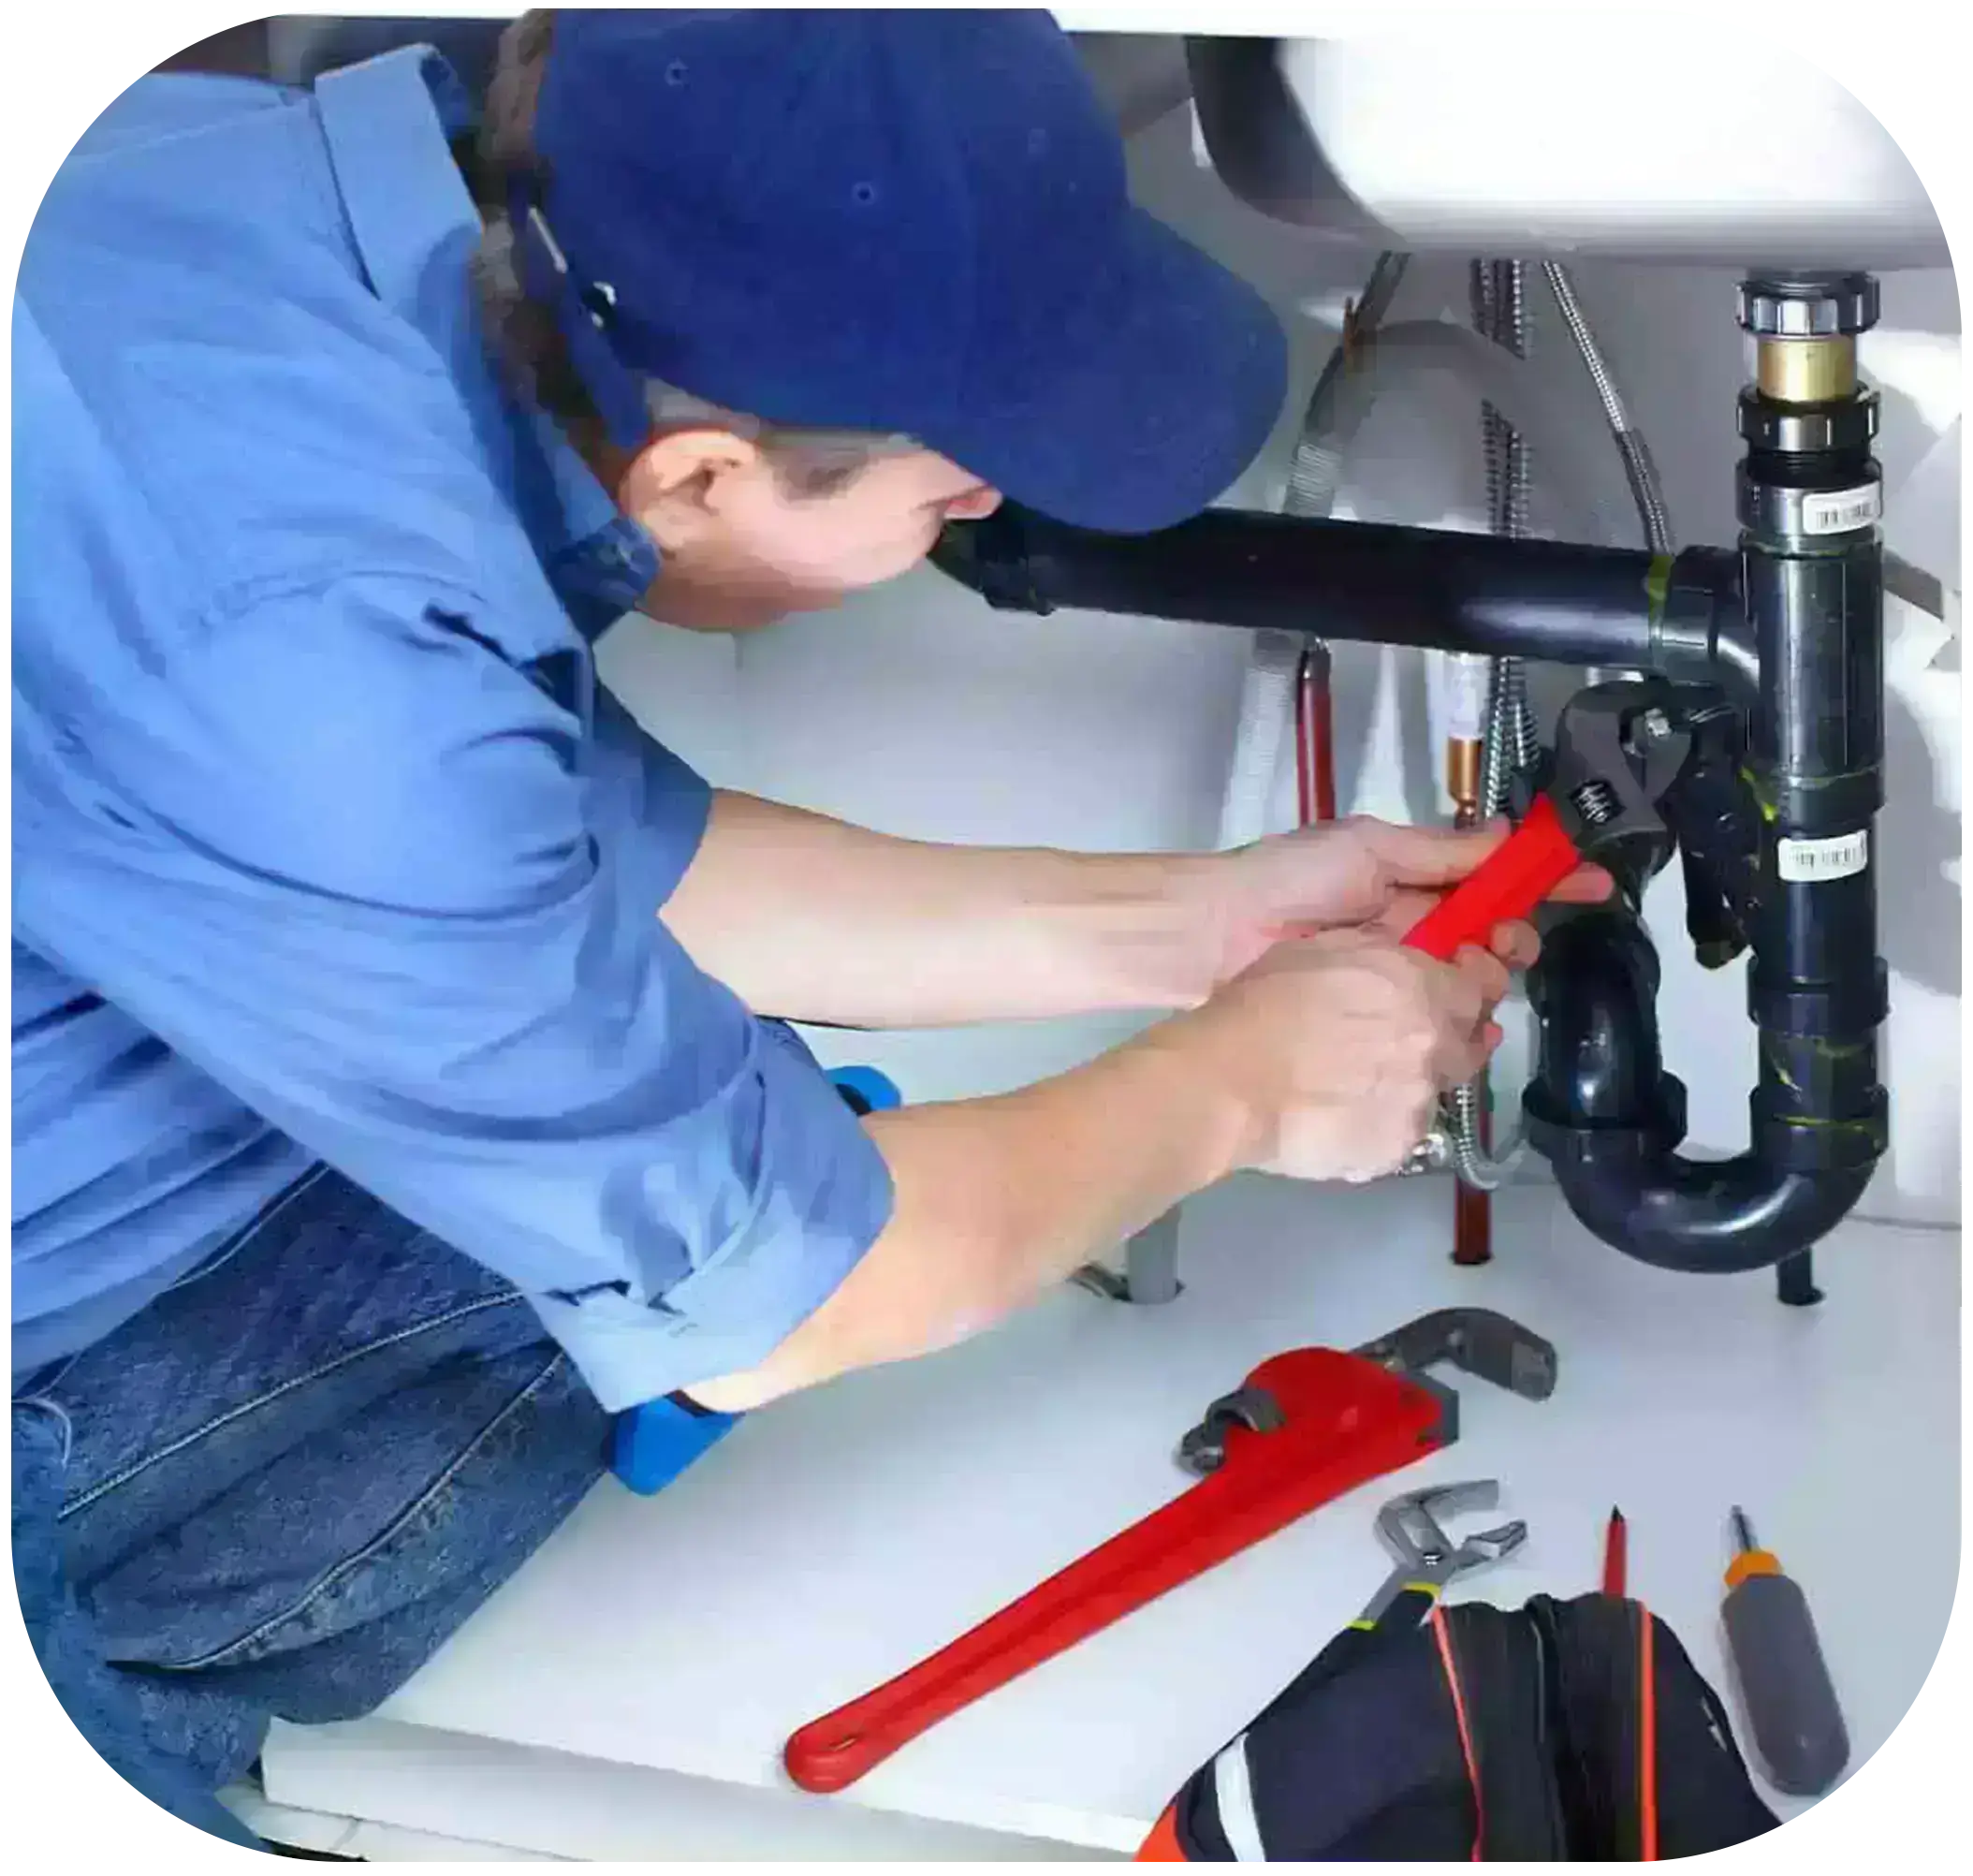 A technician uses pliers to repair a water pipe.